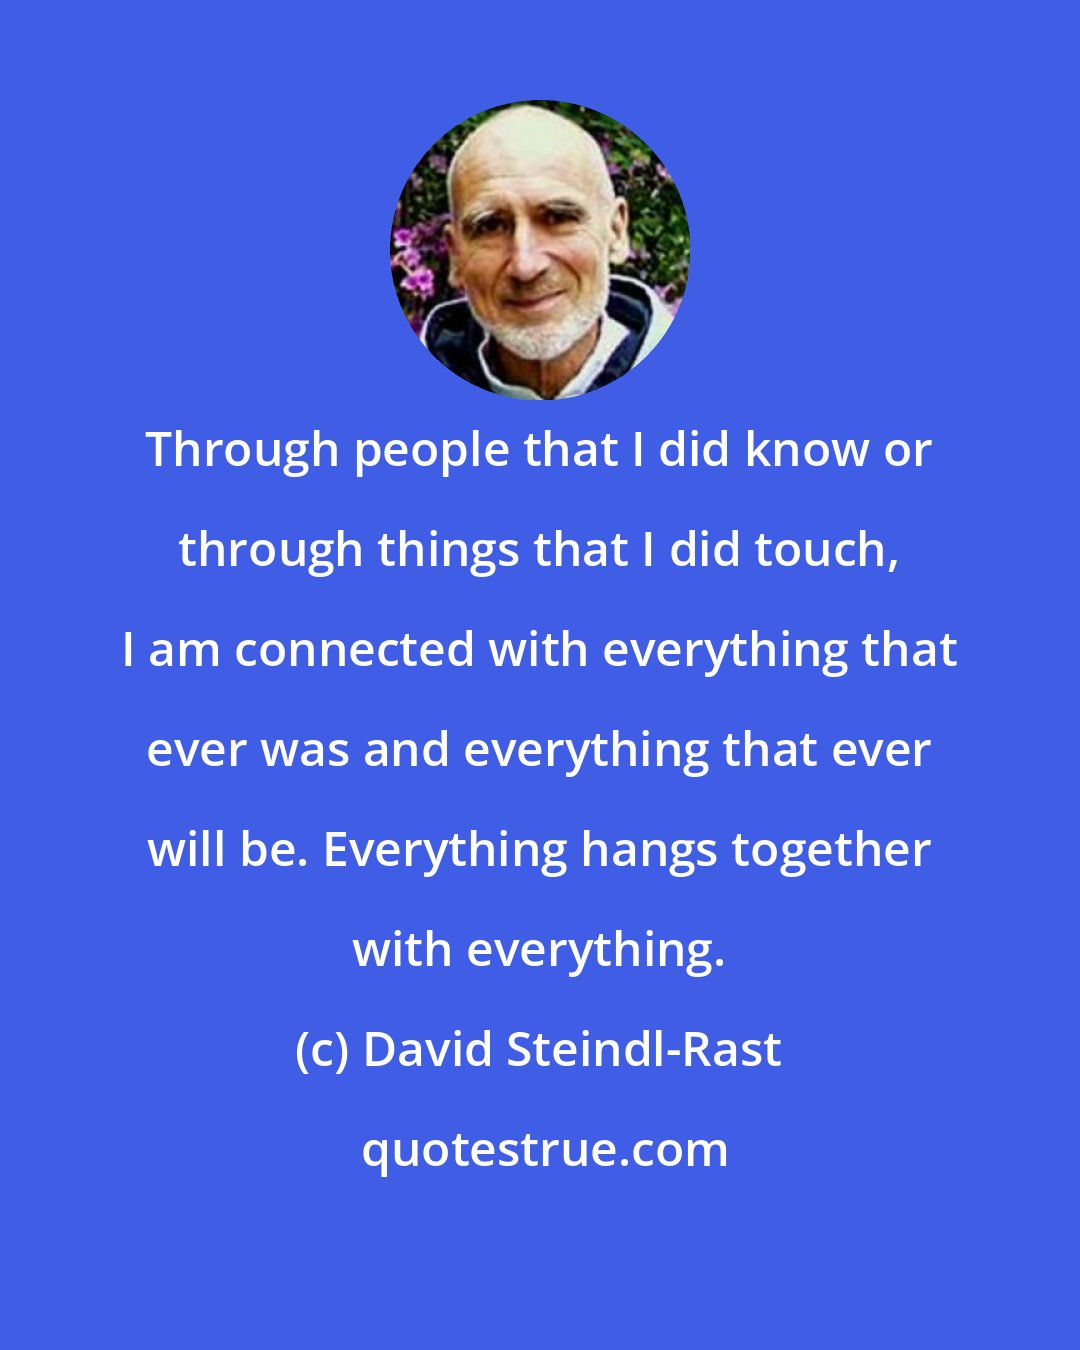 David Steindl-Rast: Through people that I did know or through things that I did touch, I am connected with everything that ever was and everything that ever will be. Everything hangs together with everything.